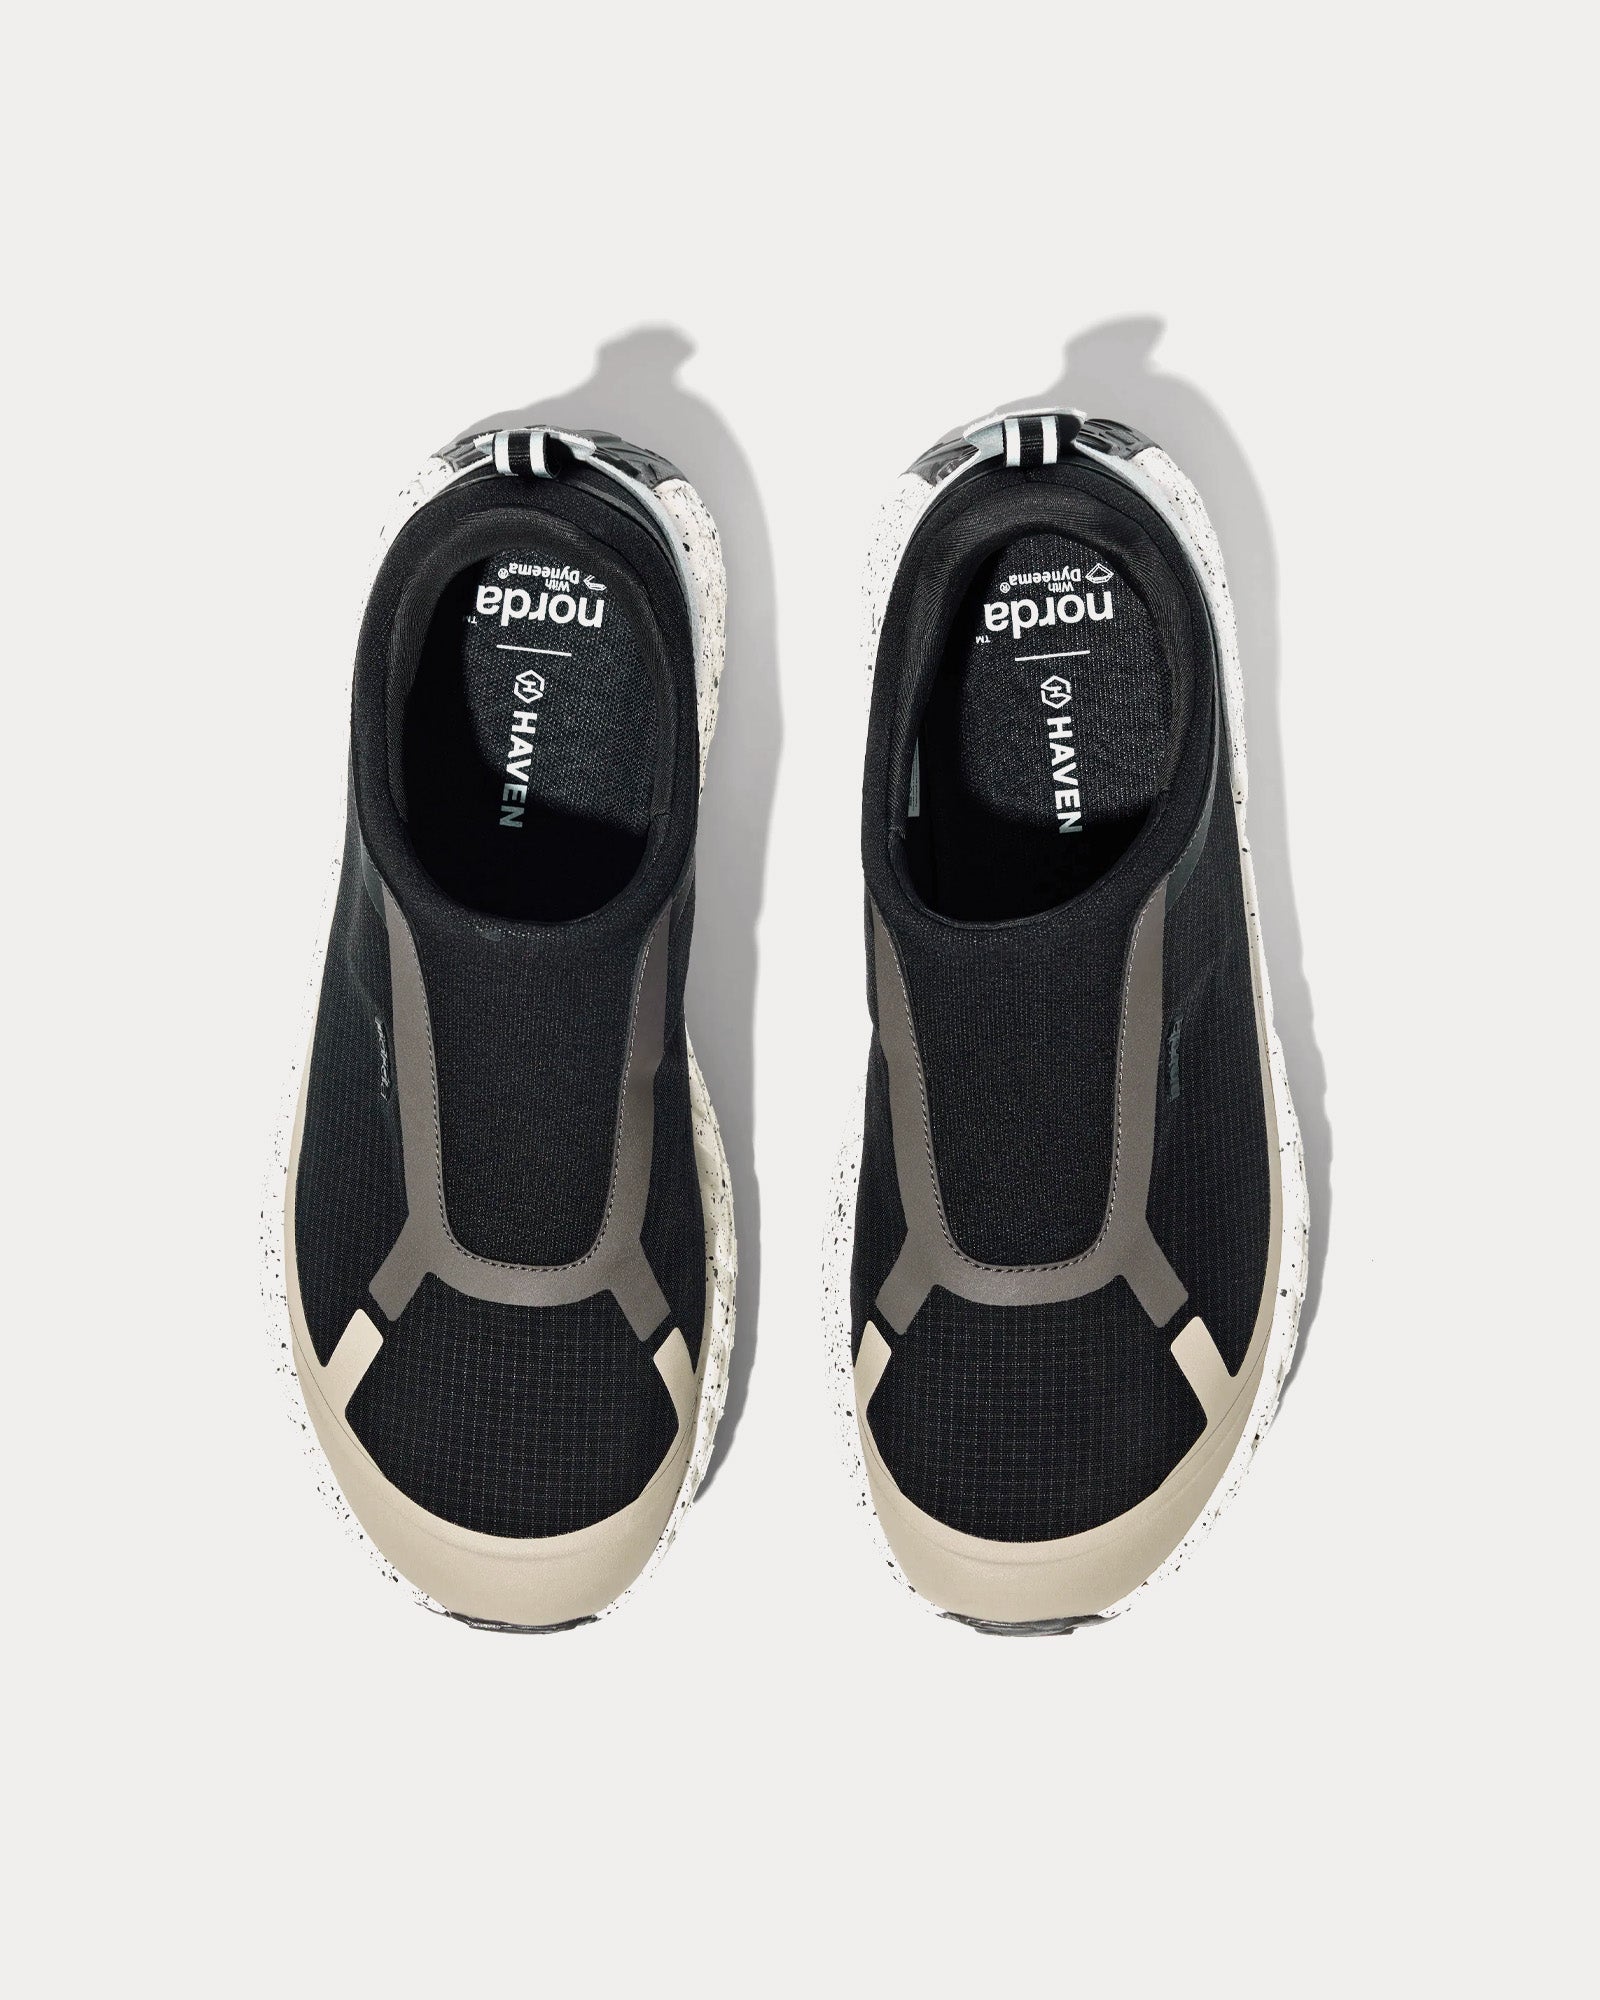 Norda x Haven - 003 W Quarry Running Shoes